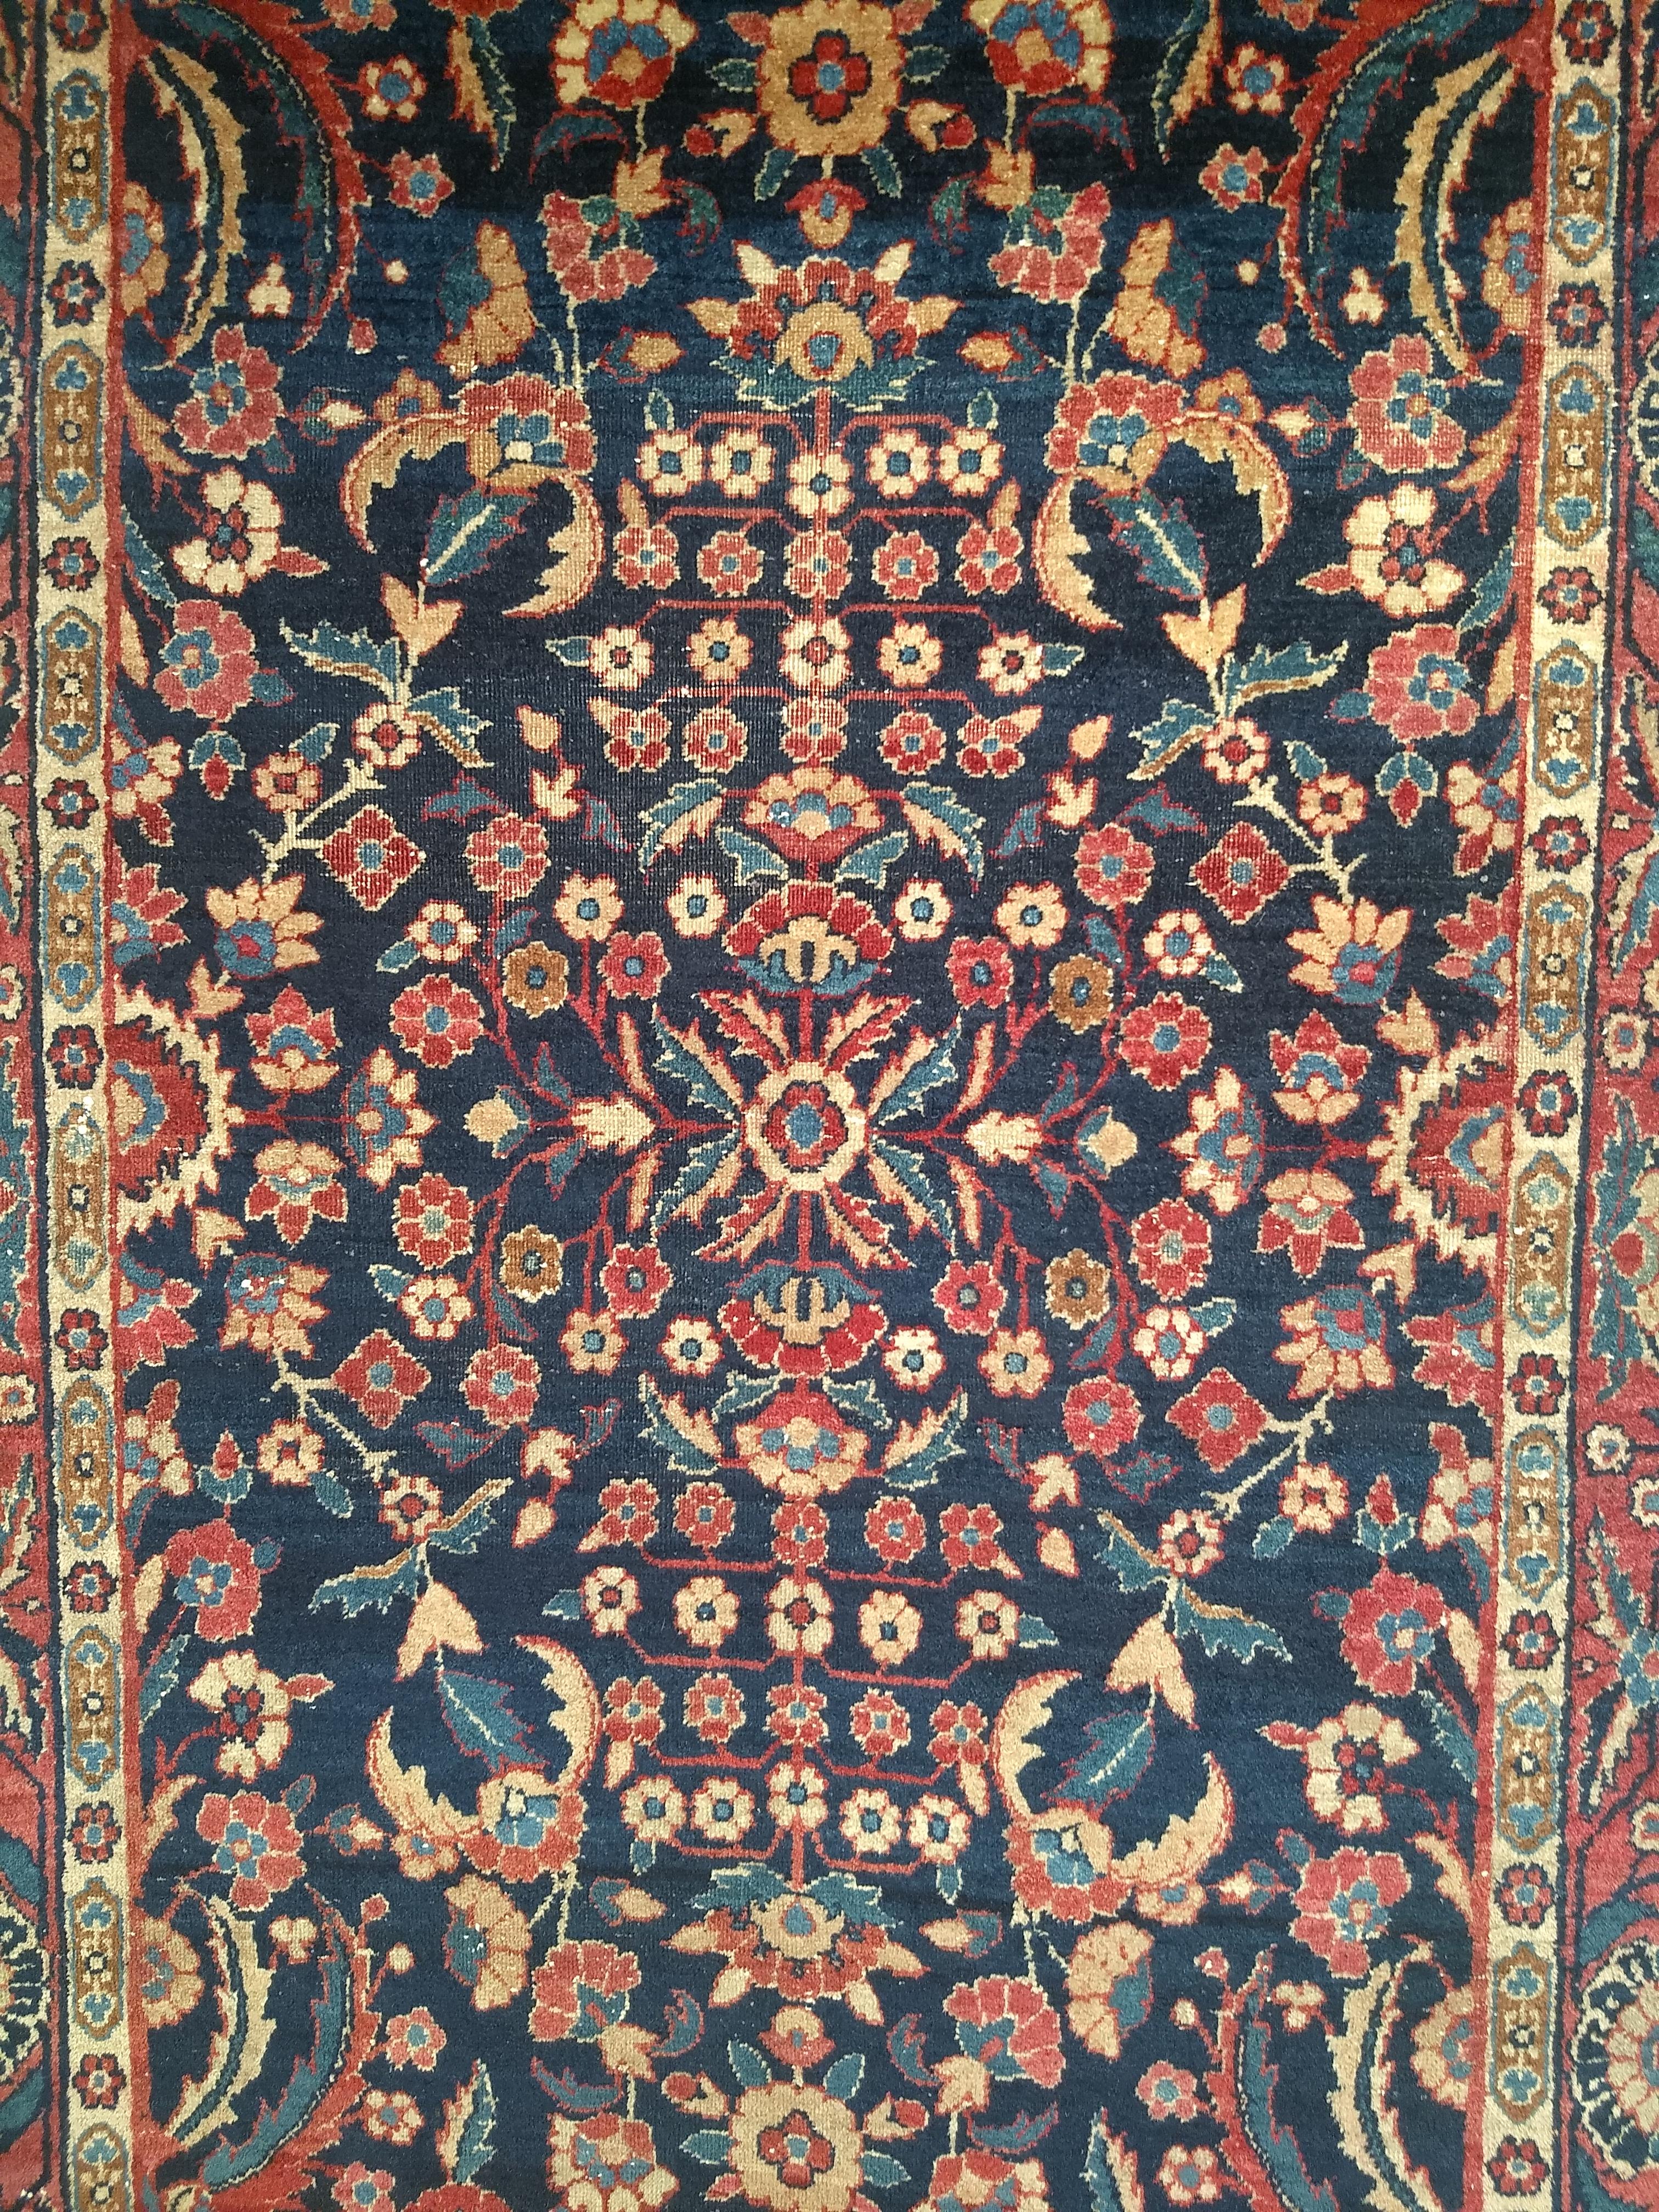 Vintage Agra Rug in Allover Floral Pattern in Navy Blue and Red Colors In Good Condition For Sale In Barrington, IL